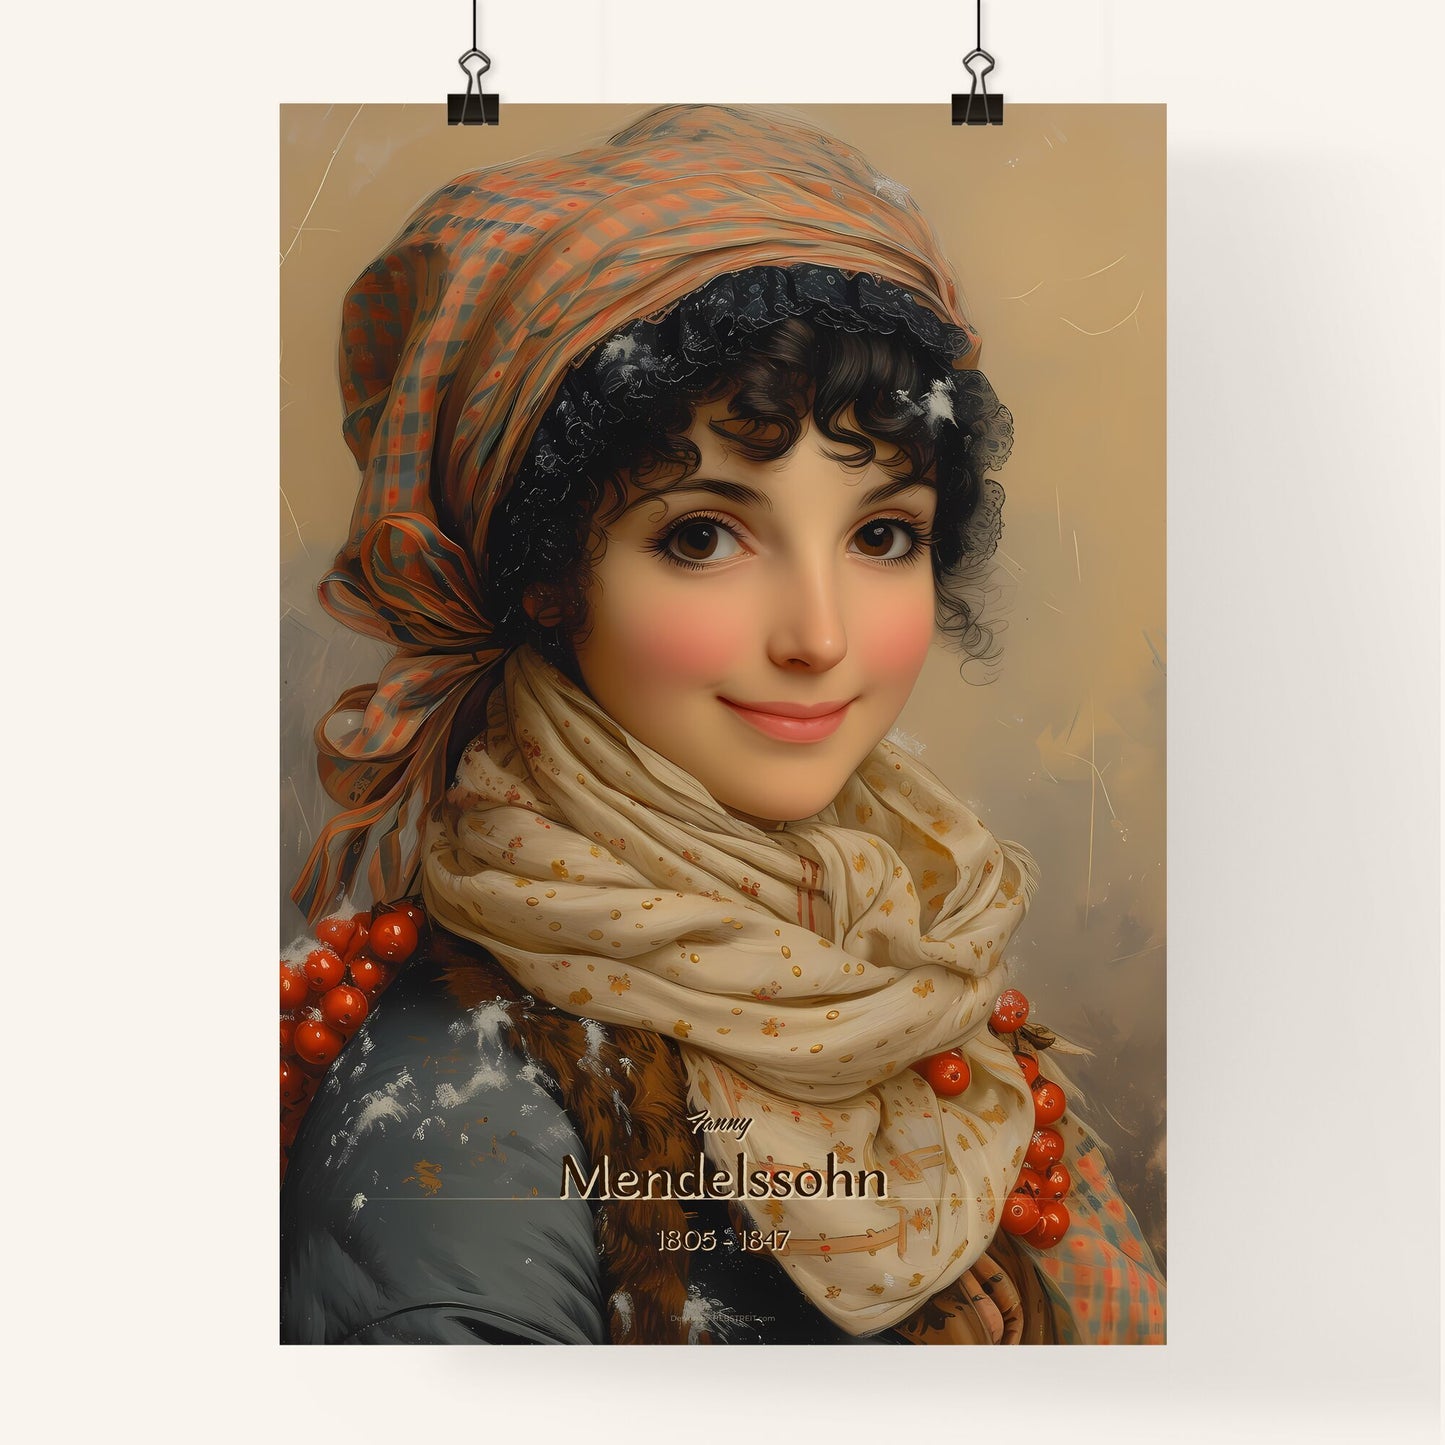 Fanny, Mendelssohn, 1805 - 1847, A Poster of a woman wearing a scarf and a scarf around her head Default Title